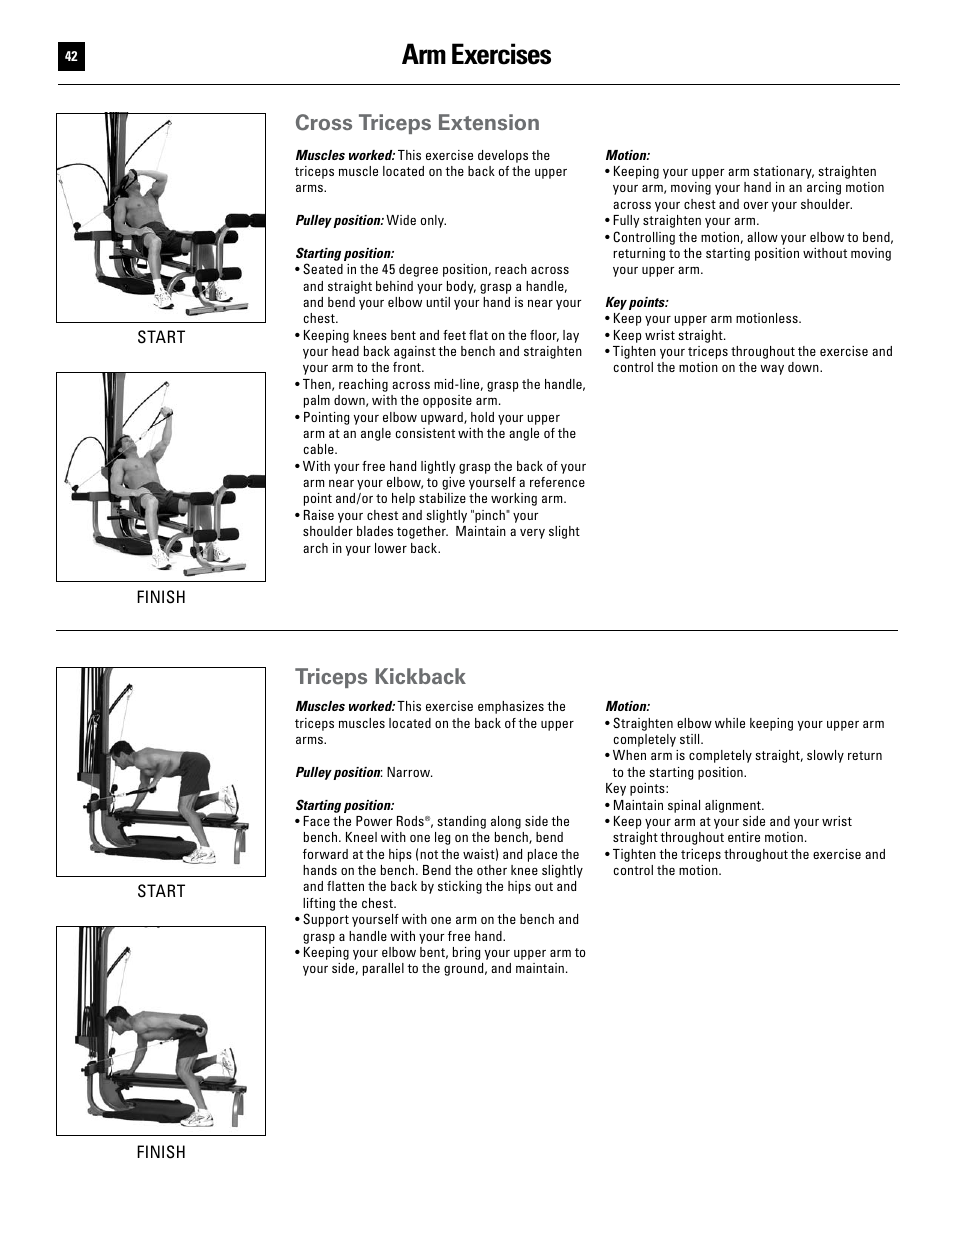 Arm exercises, Cross triceps extension, Triceps kickback | Bowflex Ultimate User Manual | Page 42 / 110